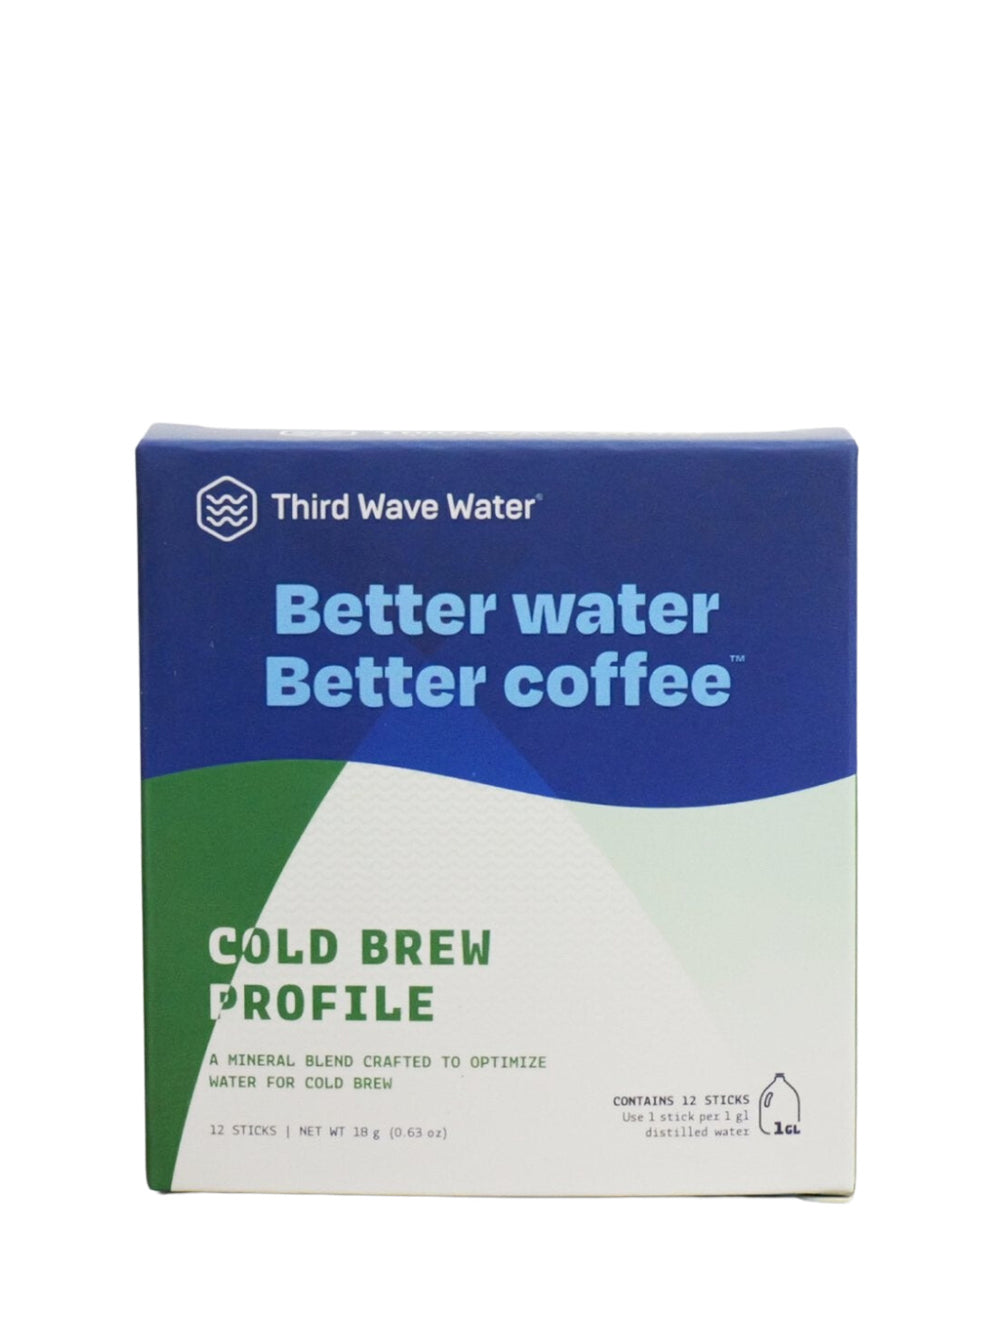 Photo of THIRD WAVE WATER Cold Brew Profile ( 1 Gallon ) [ Third Wave Water ] [ Brewing Accessories ]